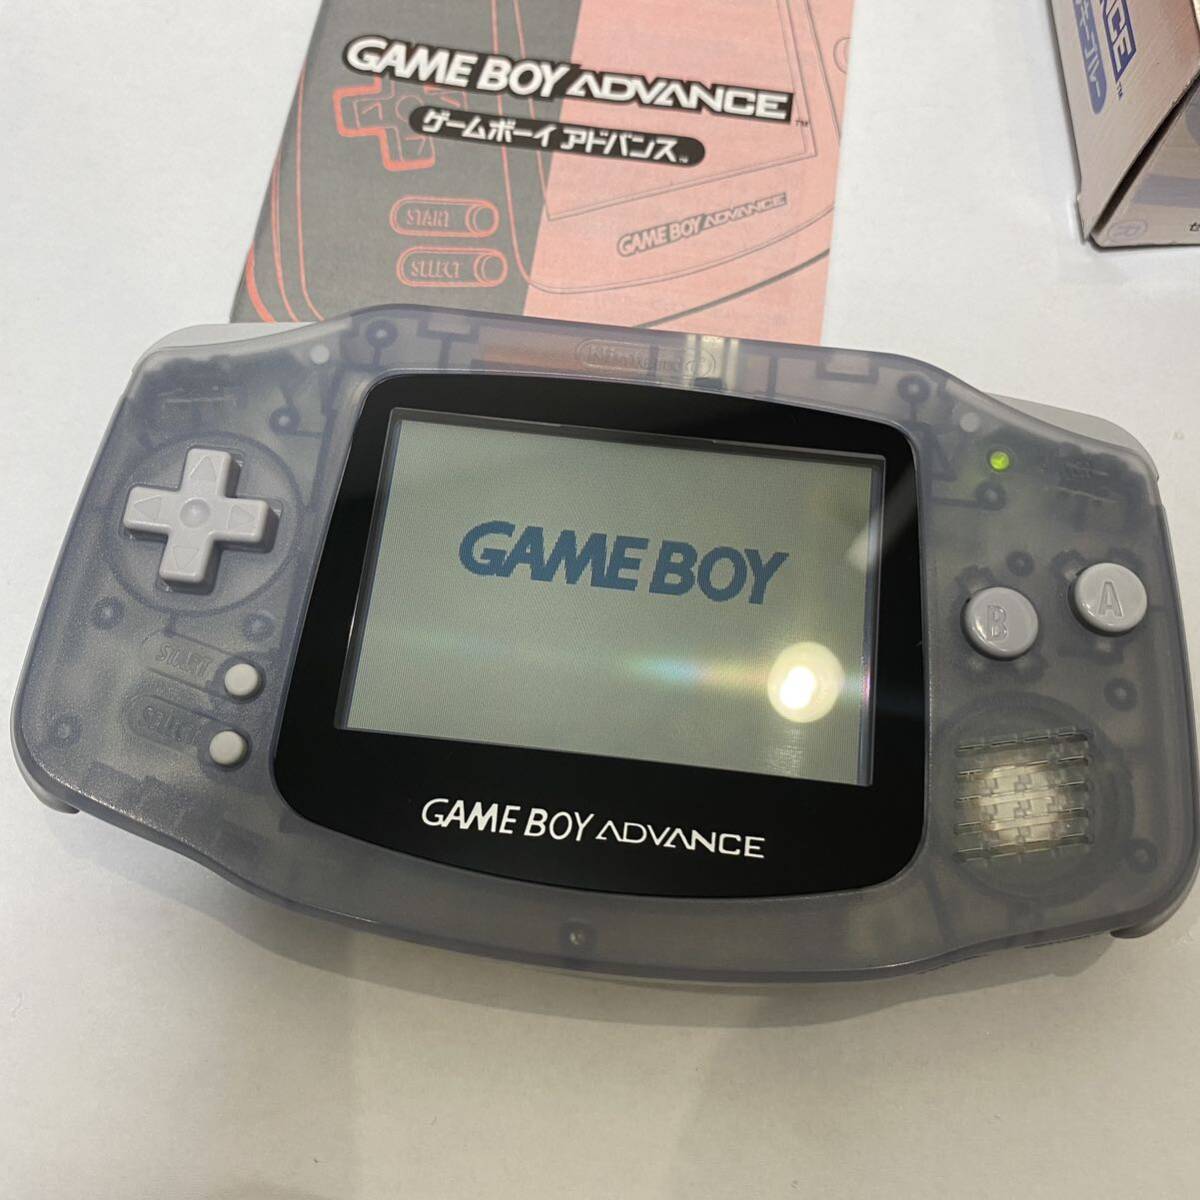  Game Boy Advance # almost new goods unused rare GBA nintendo instructions box Nintendo Nintendo Game Boy operation excellent verification settled 